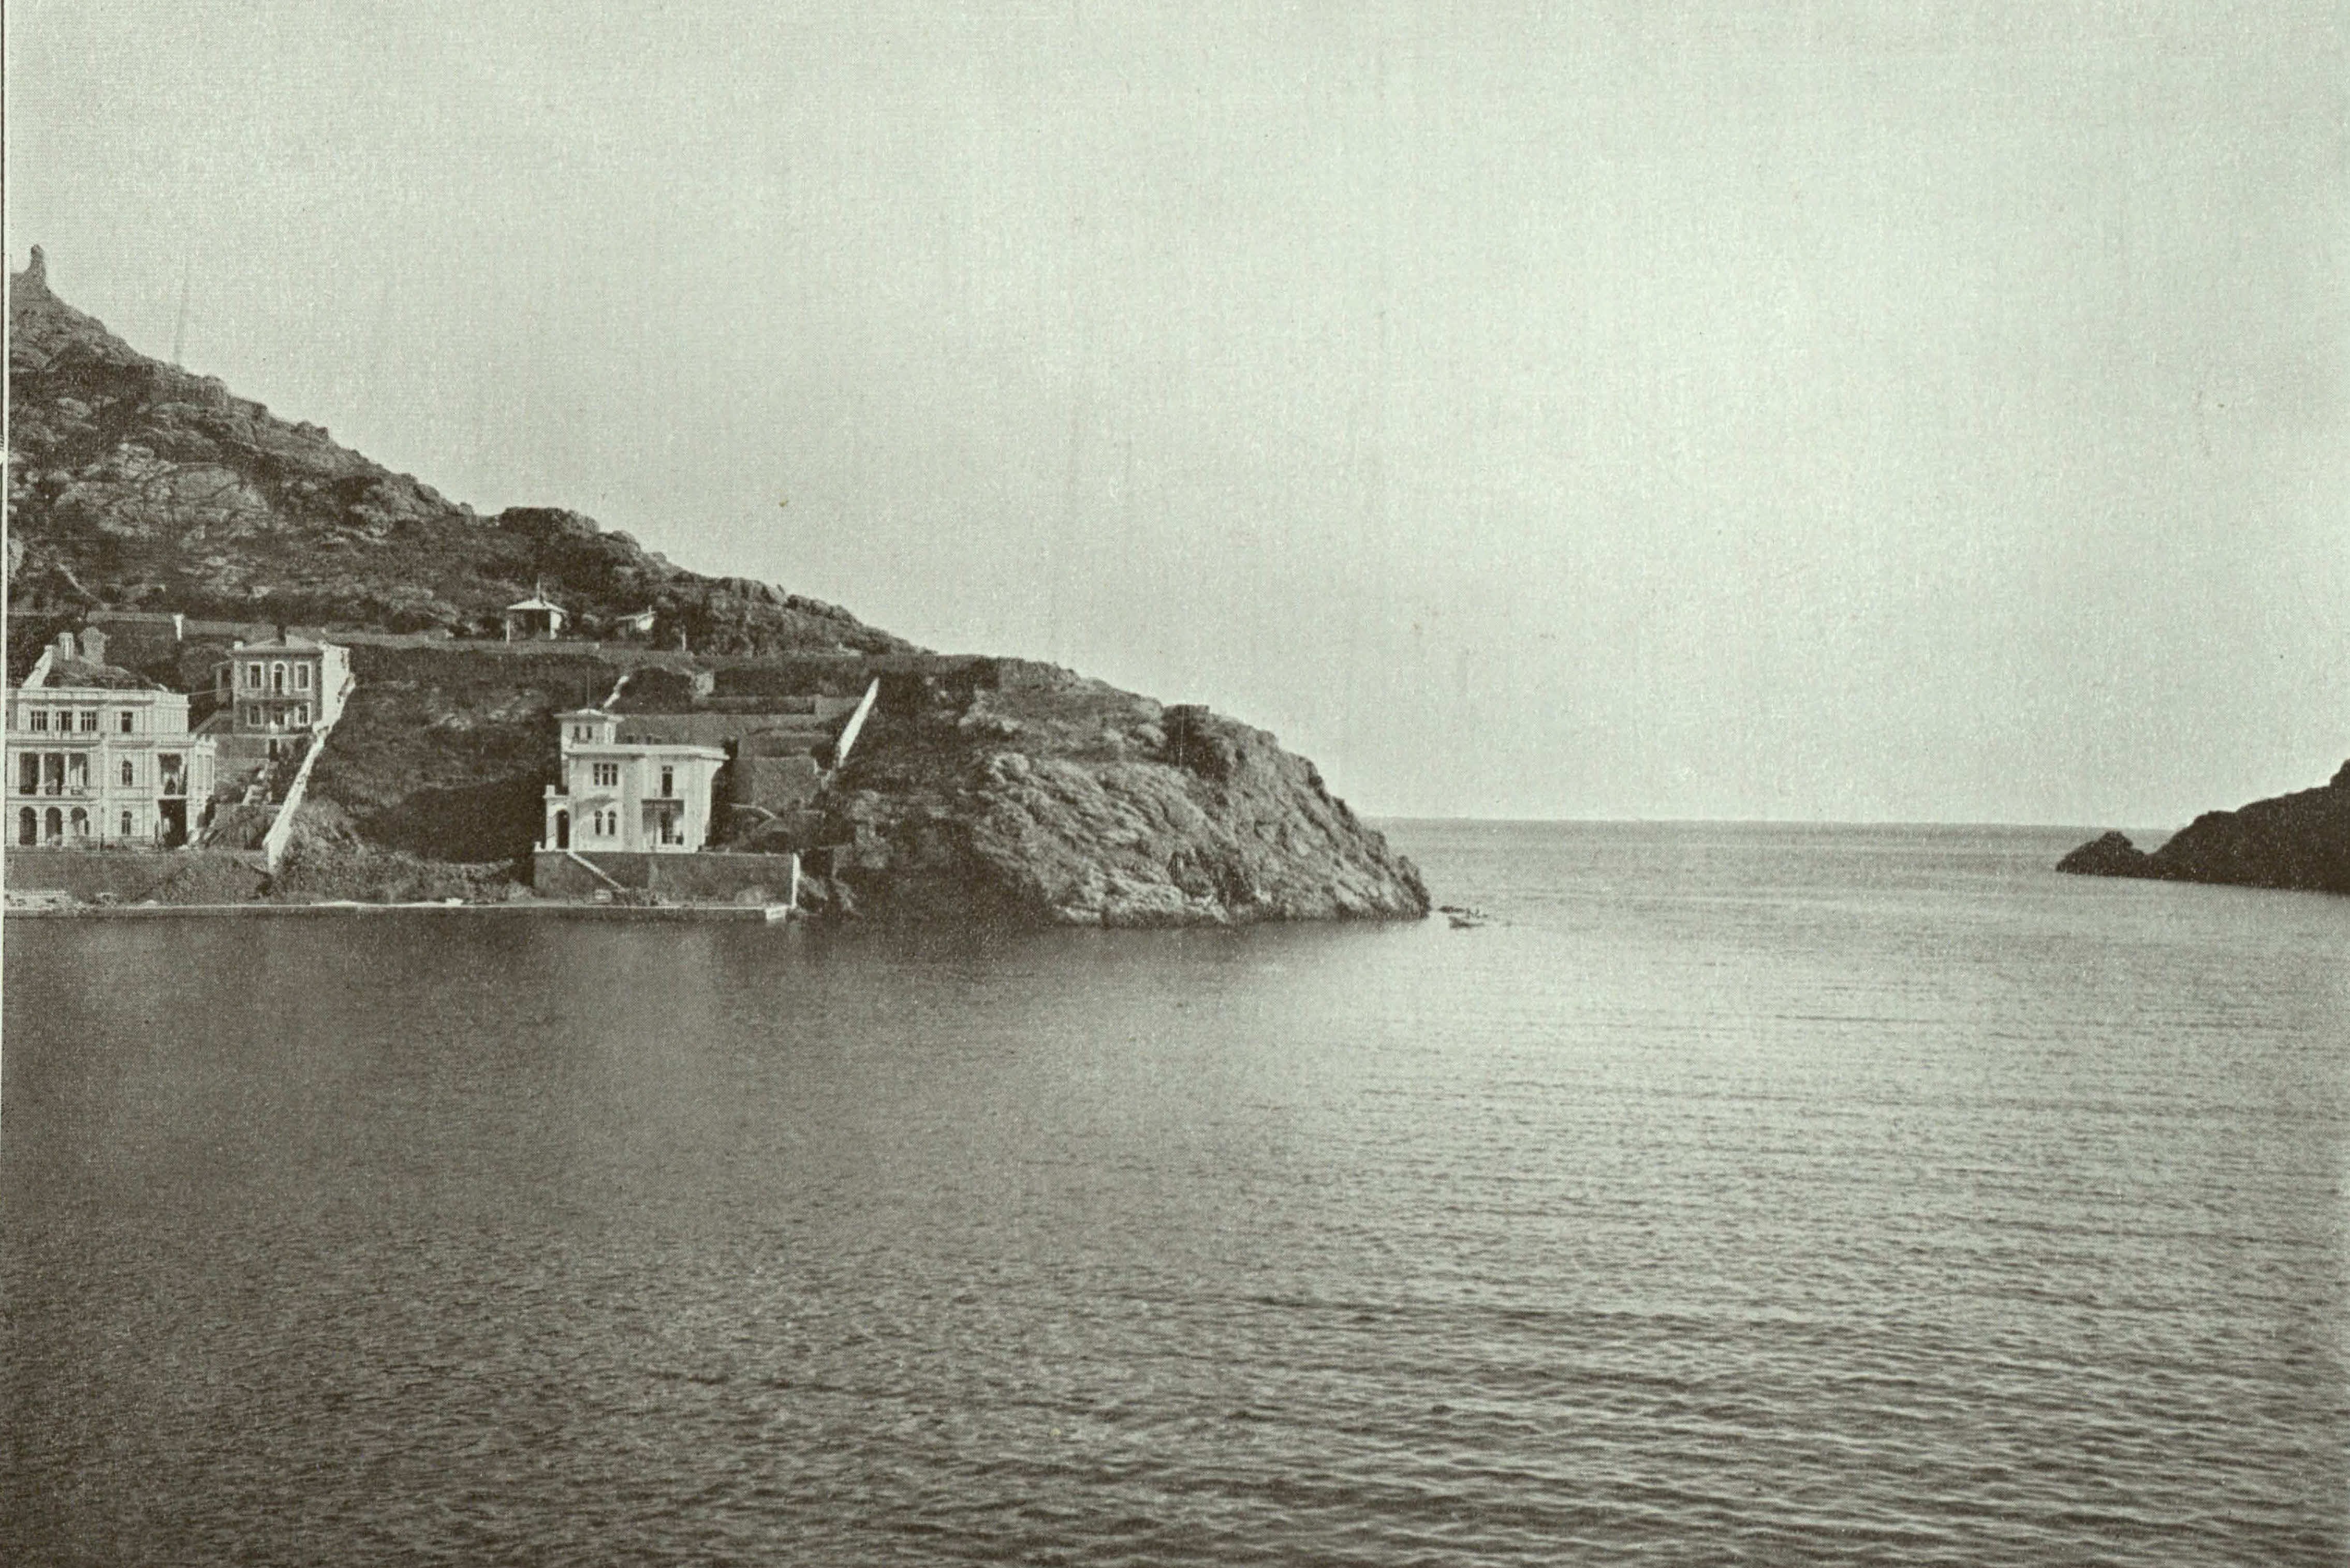 Entrance of Balaclava Bay. Photographs by Vladislav Klembovsky/Album BATTLEFIELDS OF THE CRIMEAN CAMPAIGN 1854-1855/courtesy of the State Historic Public Library of Russia